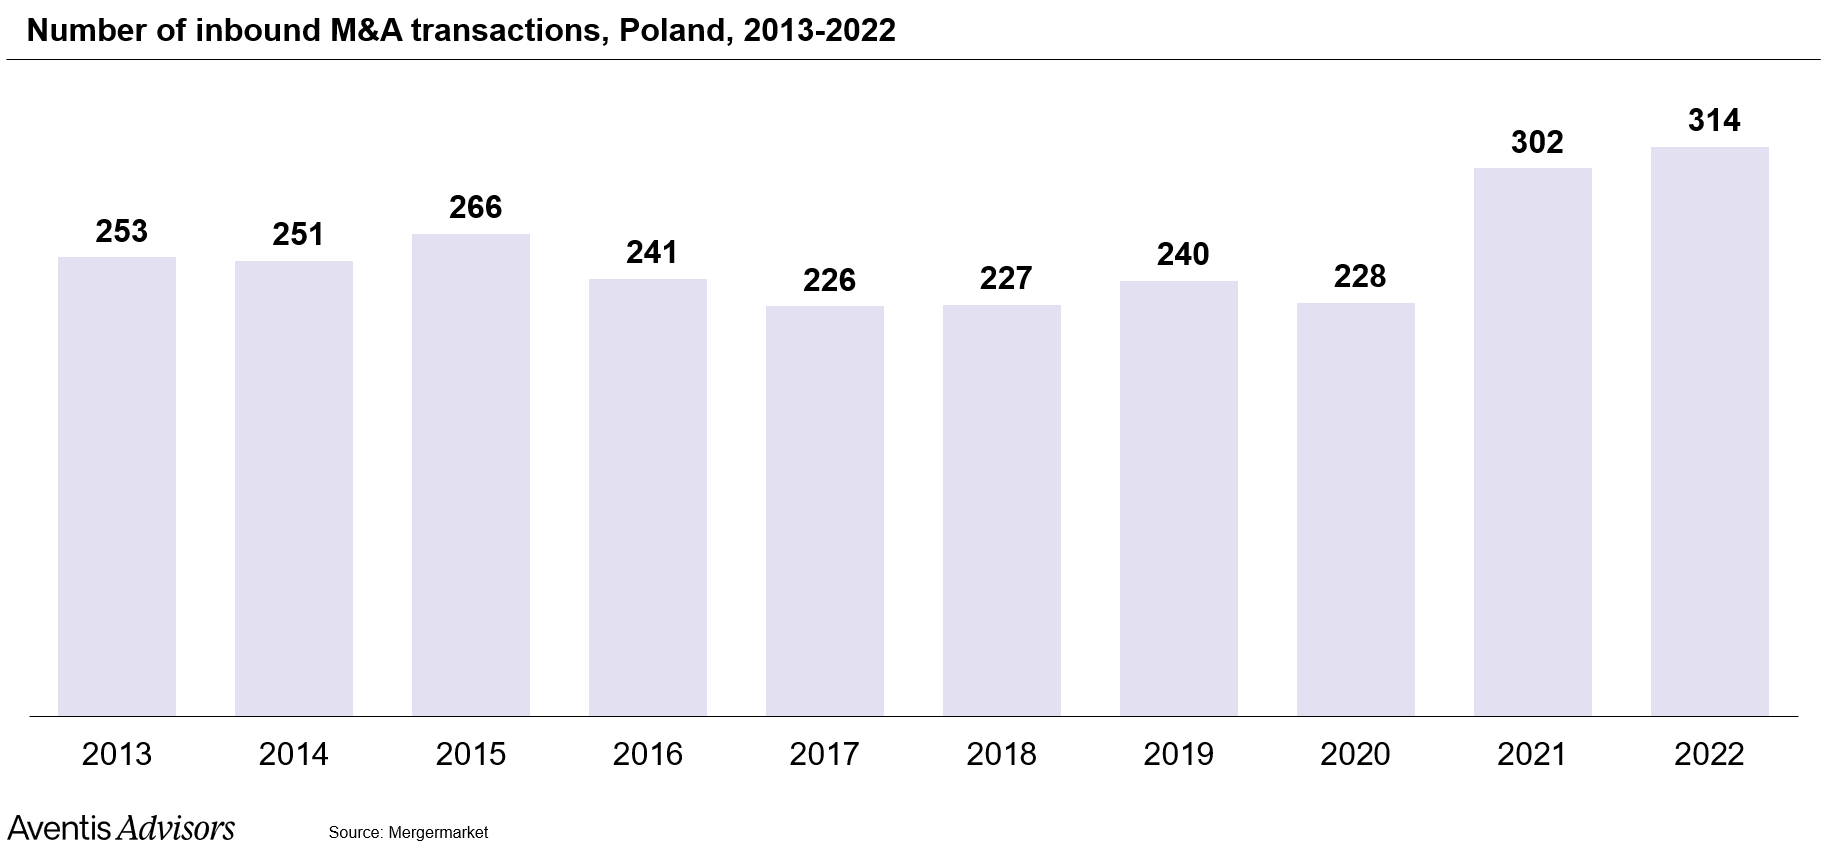 Number of inbound M&A transactions in Poland